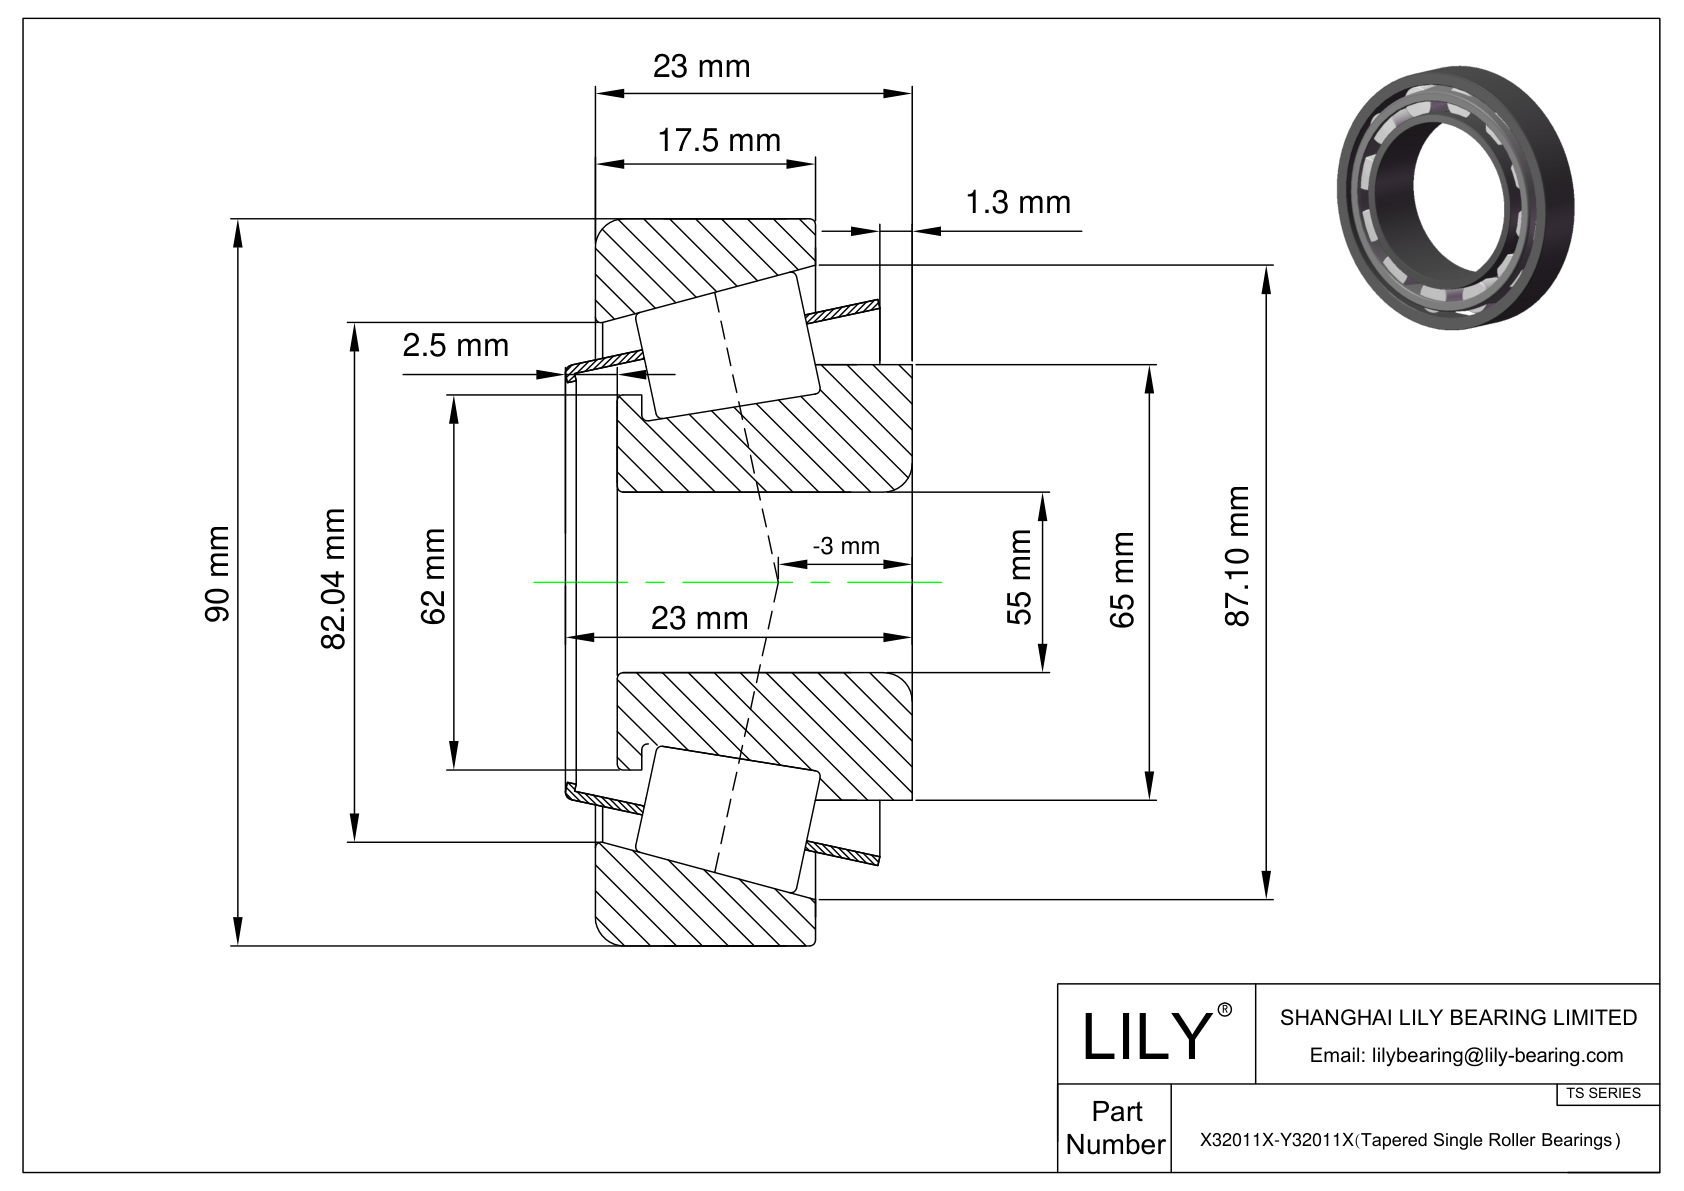 X32011X-Y32011X TS (Tapered Single Roller Bearings) (Metric) cad drawing